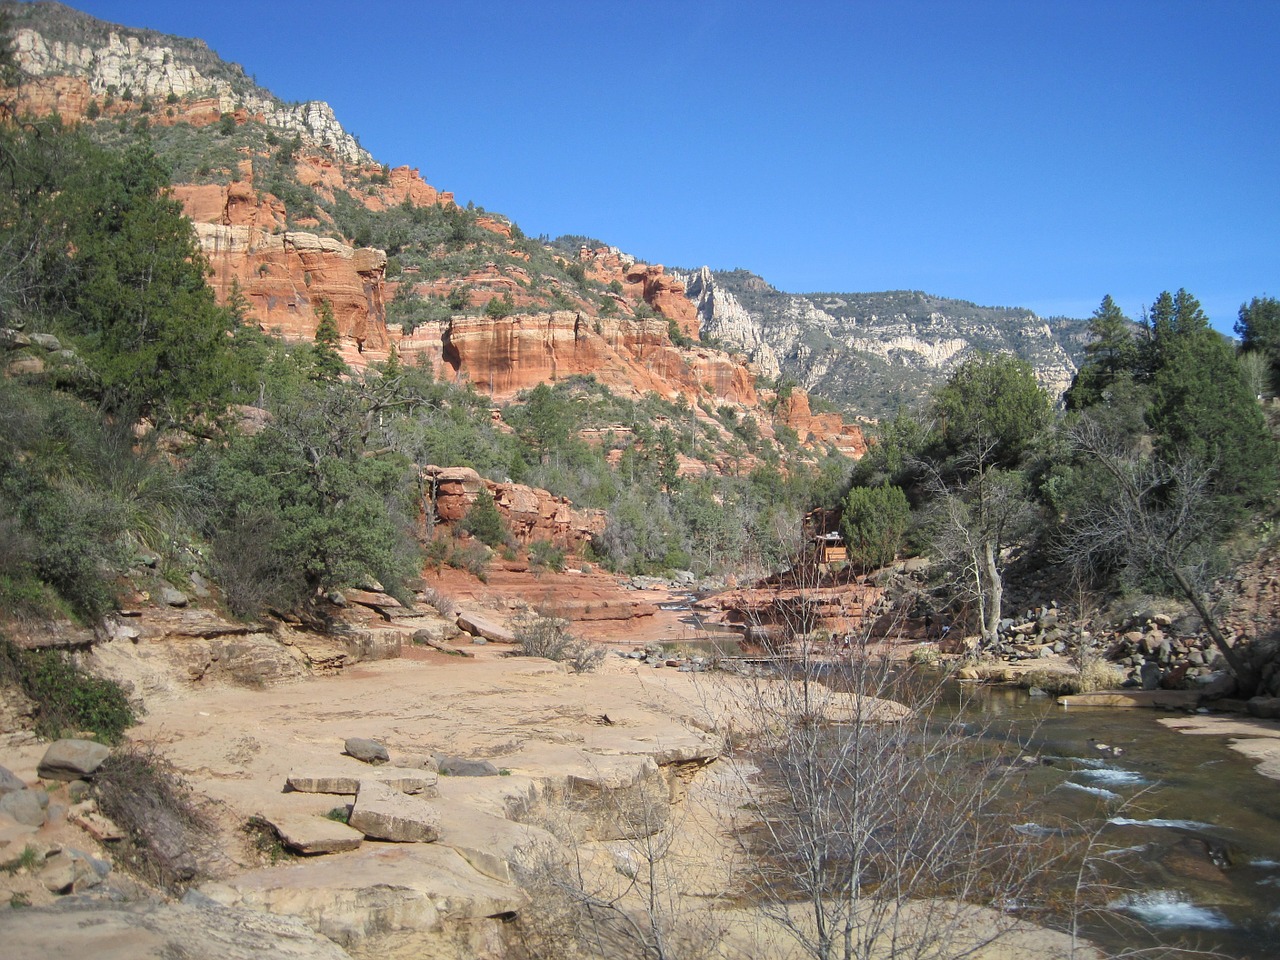 A scenic picture of Slide Rock